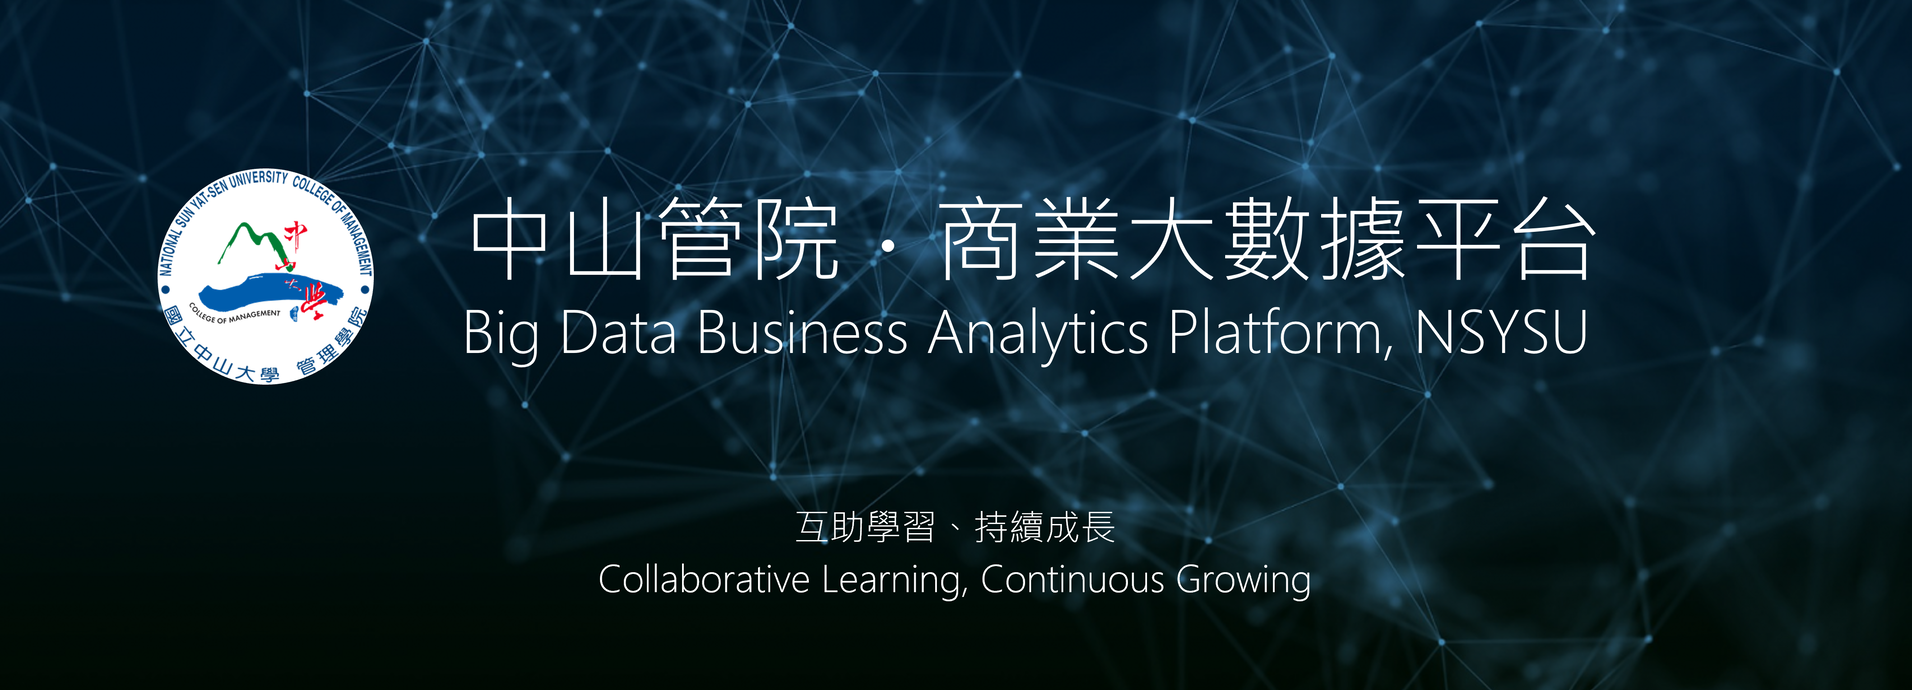 Our Highlights - Big Data Business Analytics